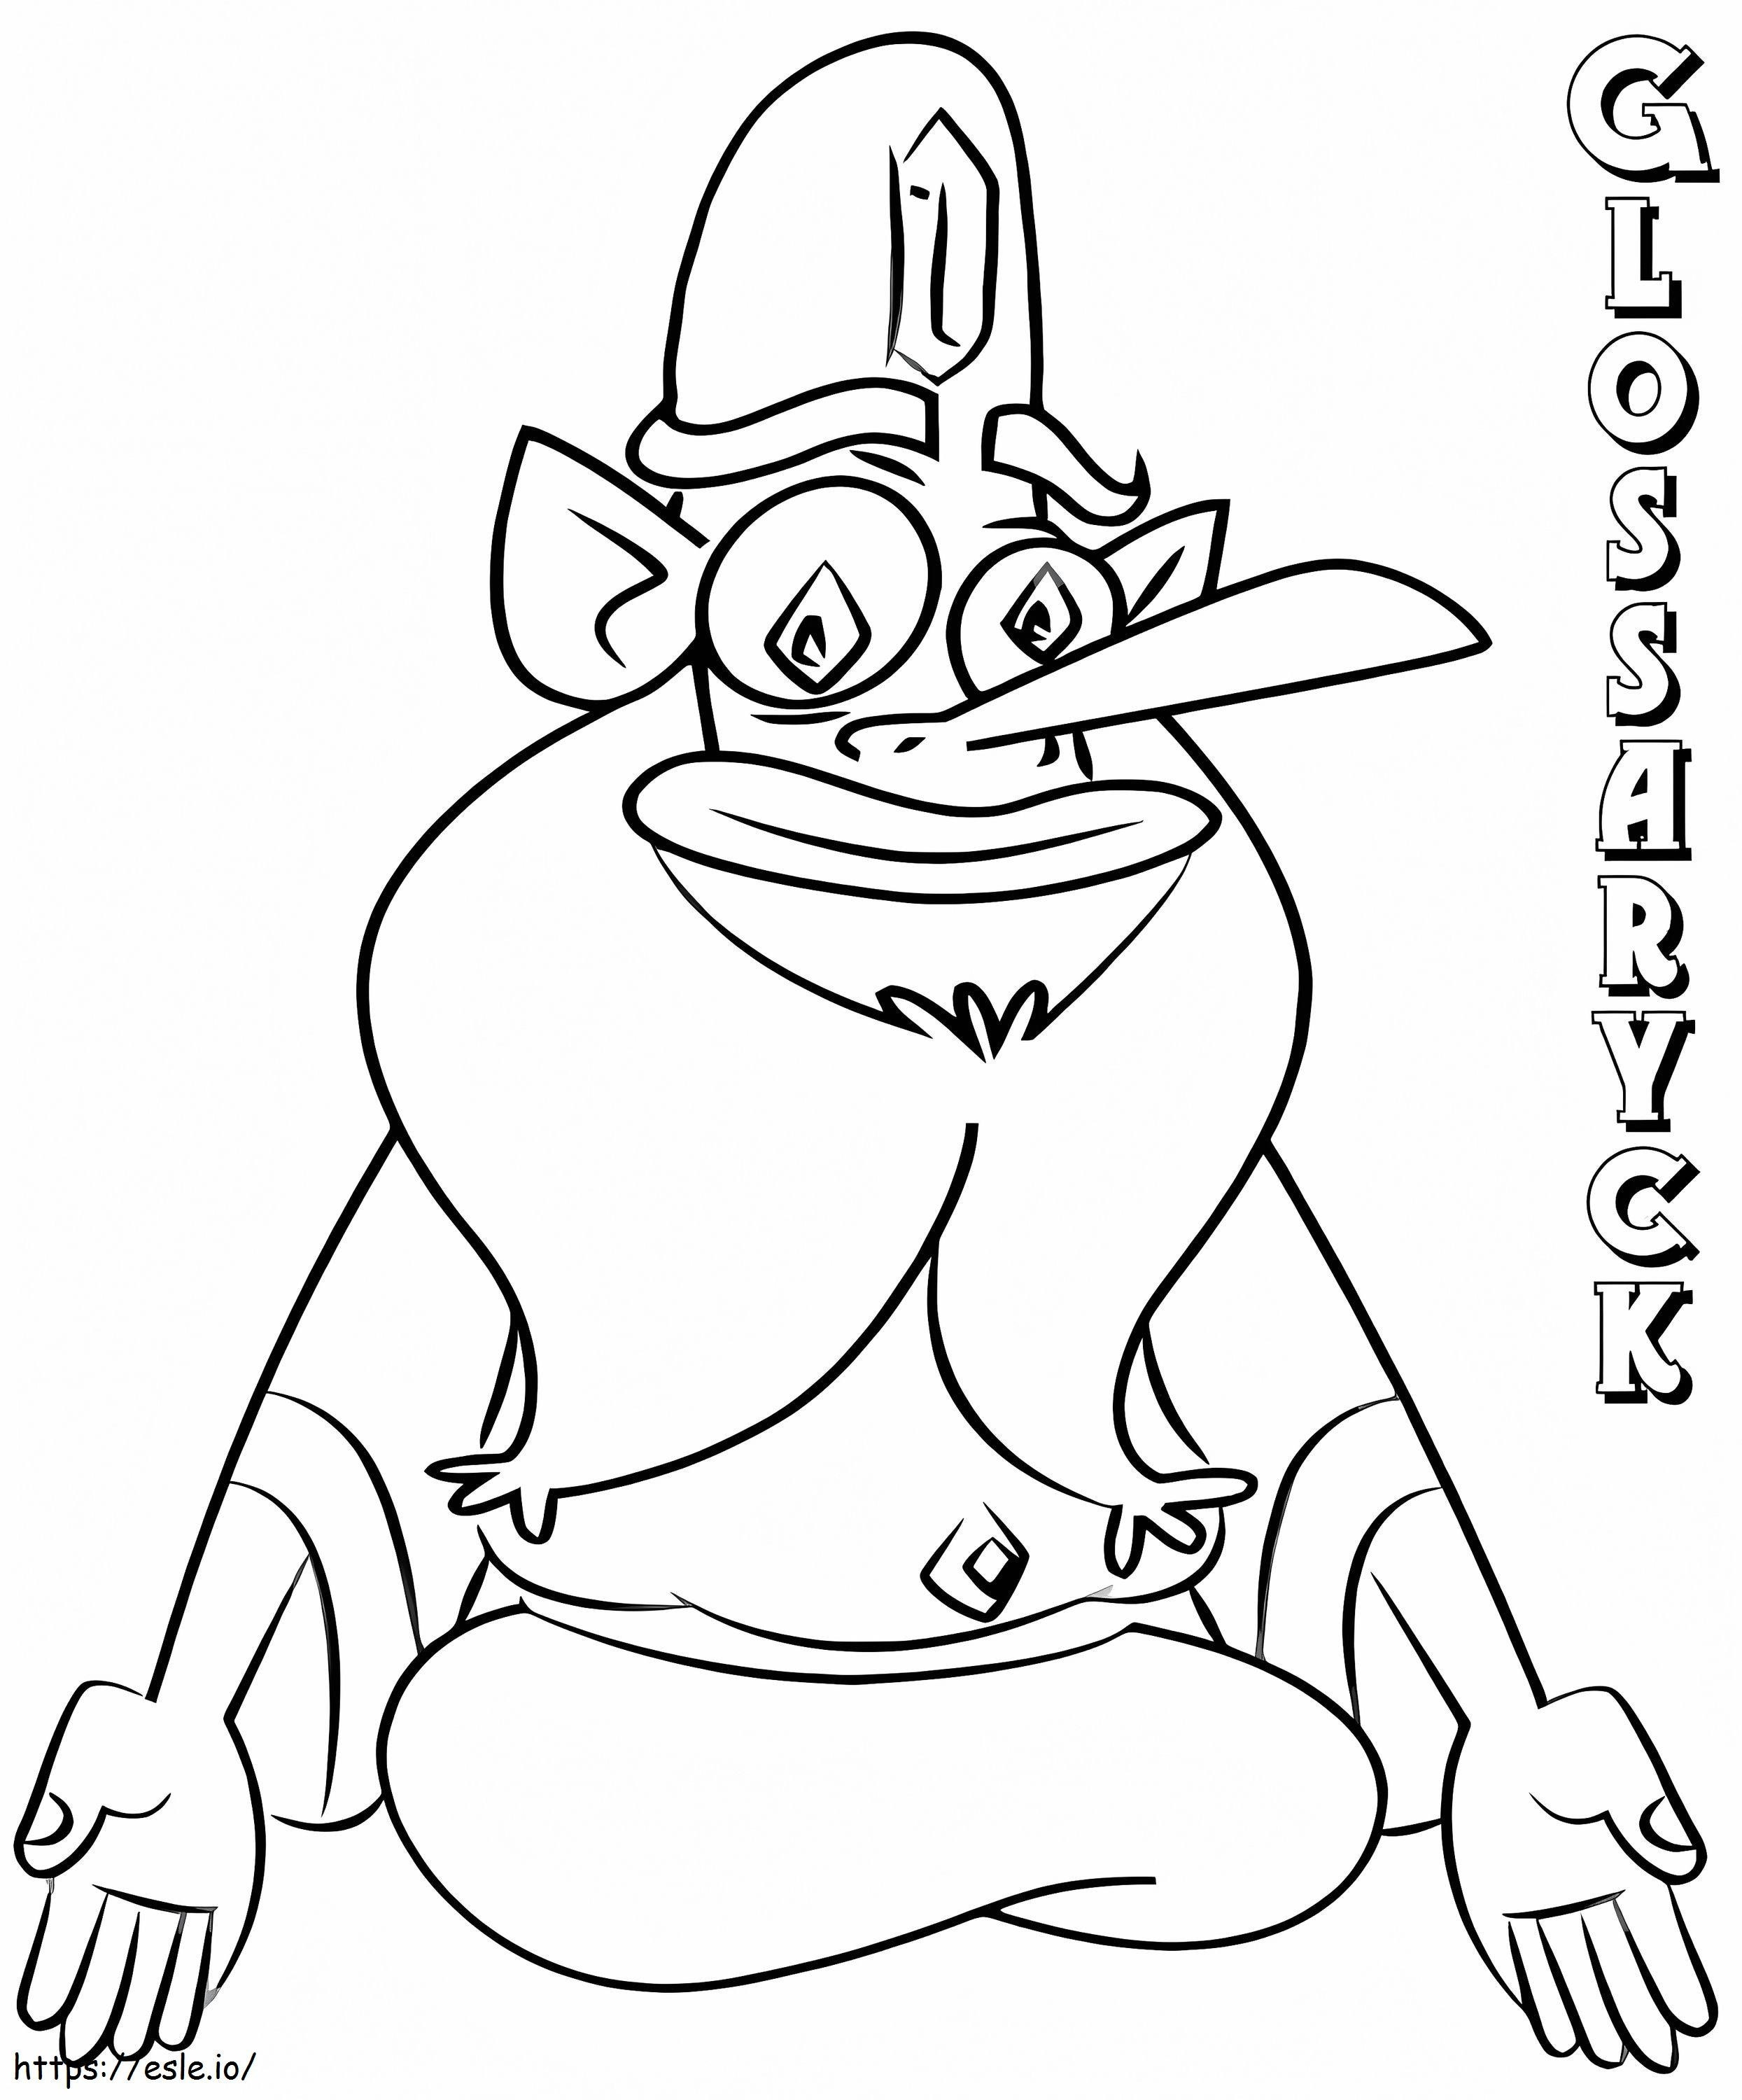 Glossary coloring page